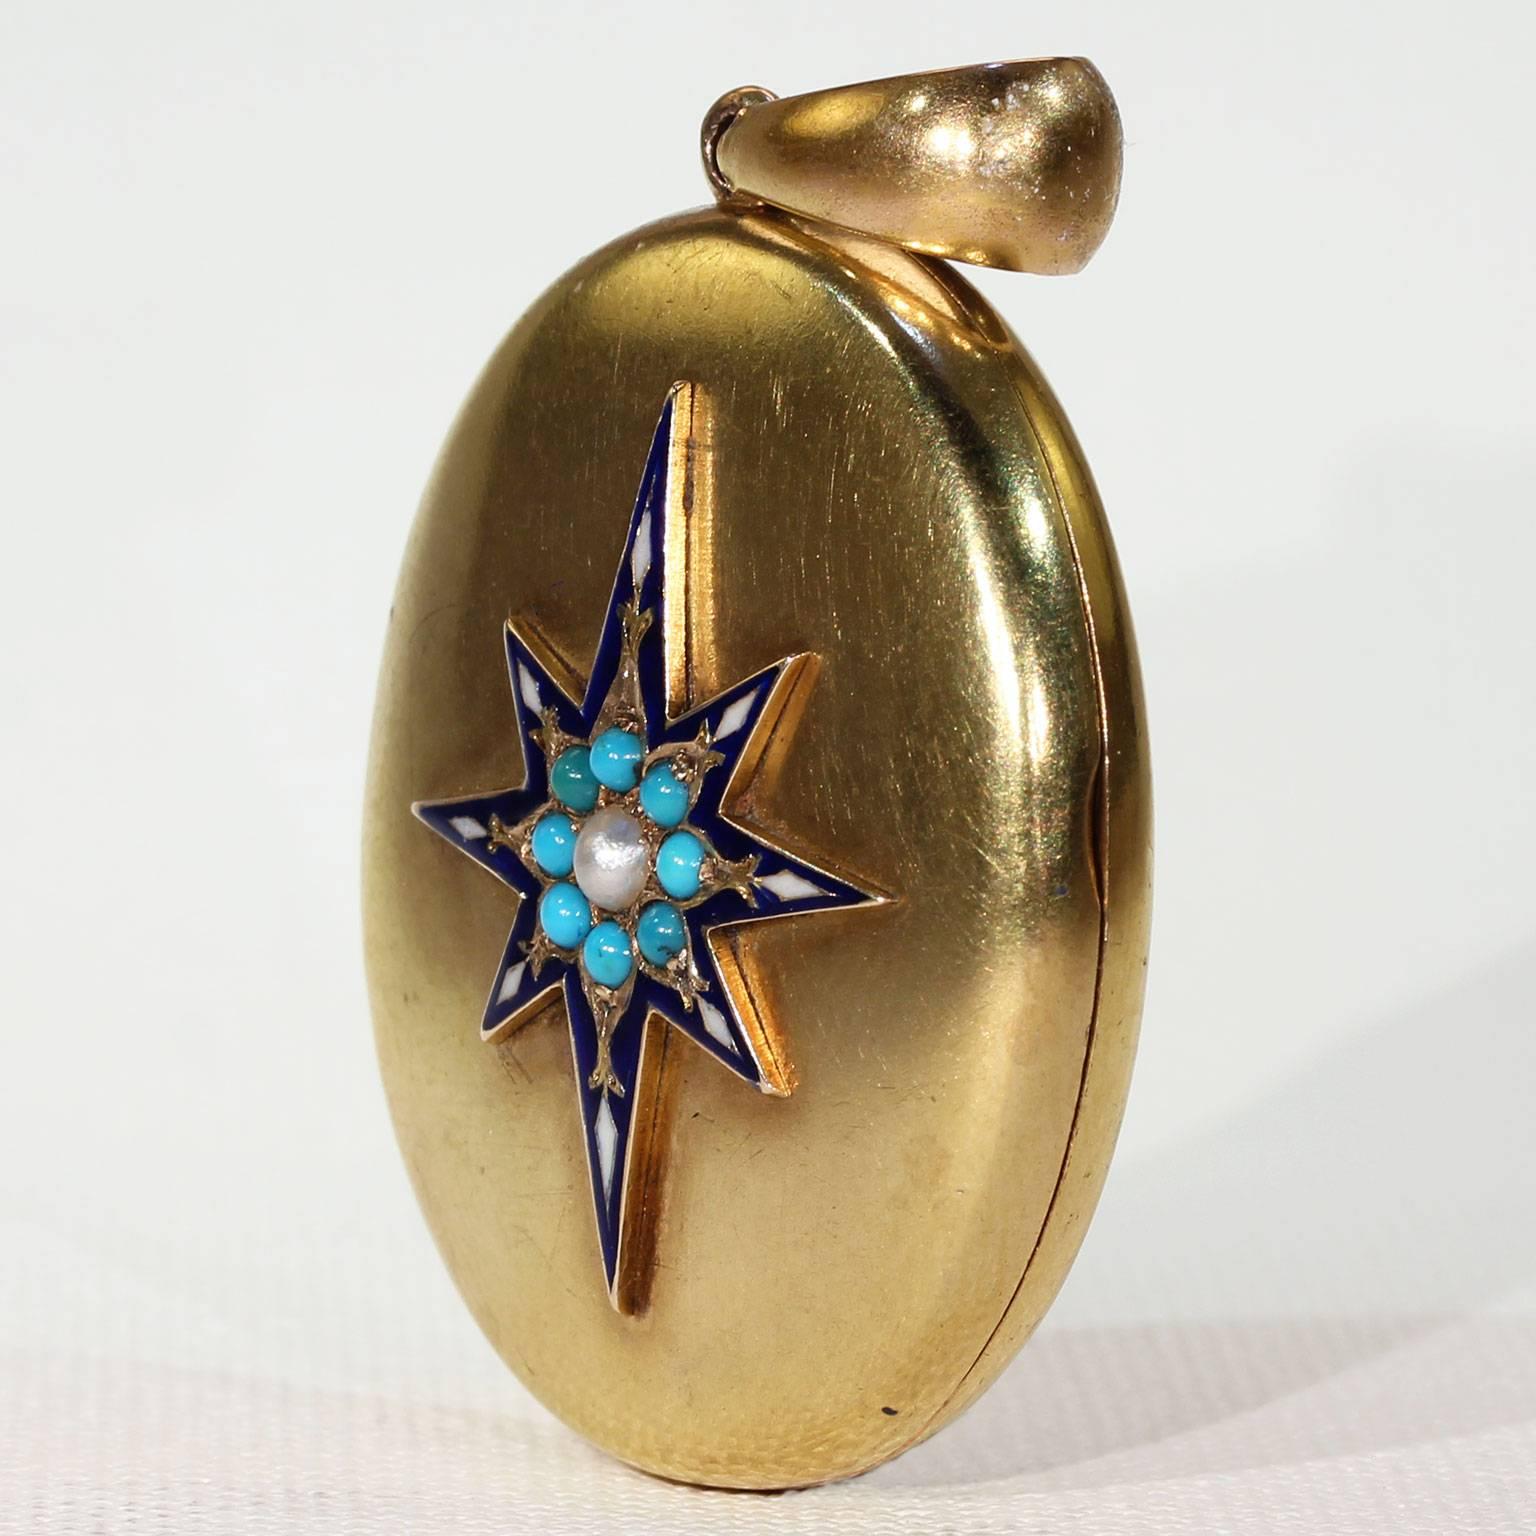 This antique Victorian locket was handcrafted around 1890, in England. It’s done in 18 karat yellow gold and set with a turquoise and pearl star motif. Beautiful dark blue and white enamel give the star depth and beauty. When opened, it reveals a